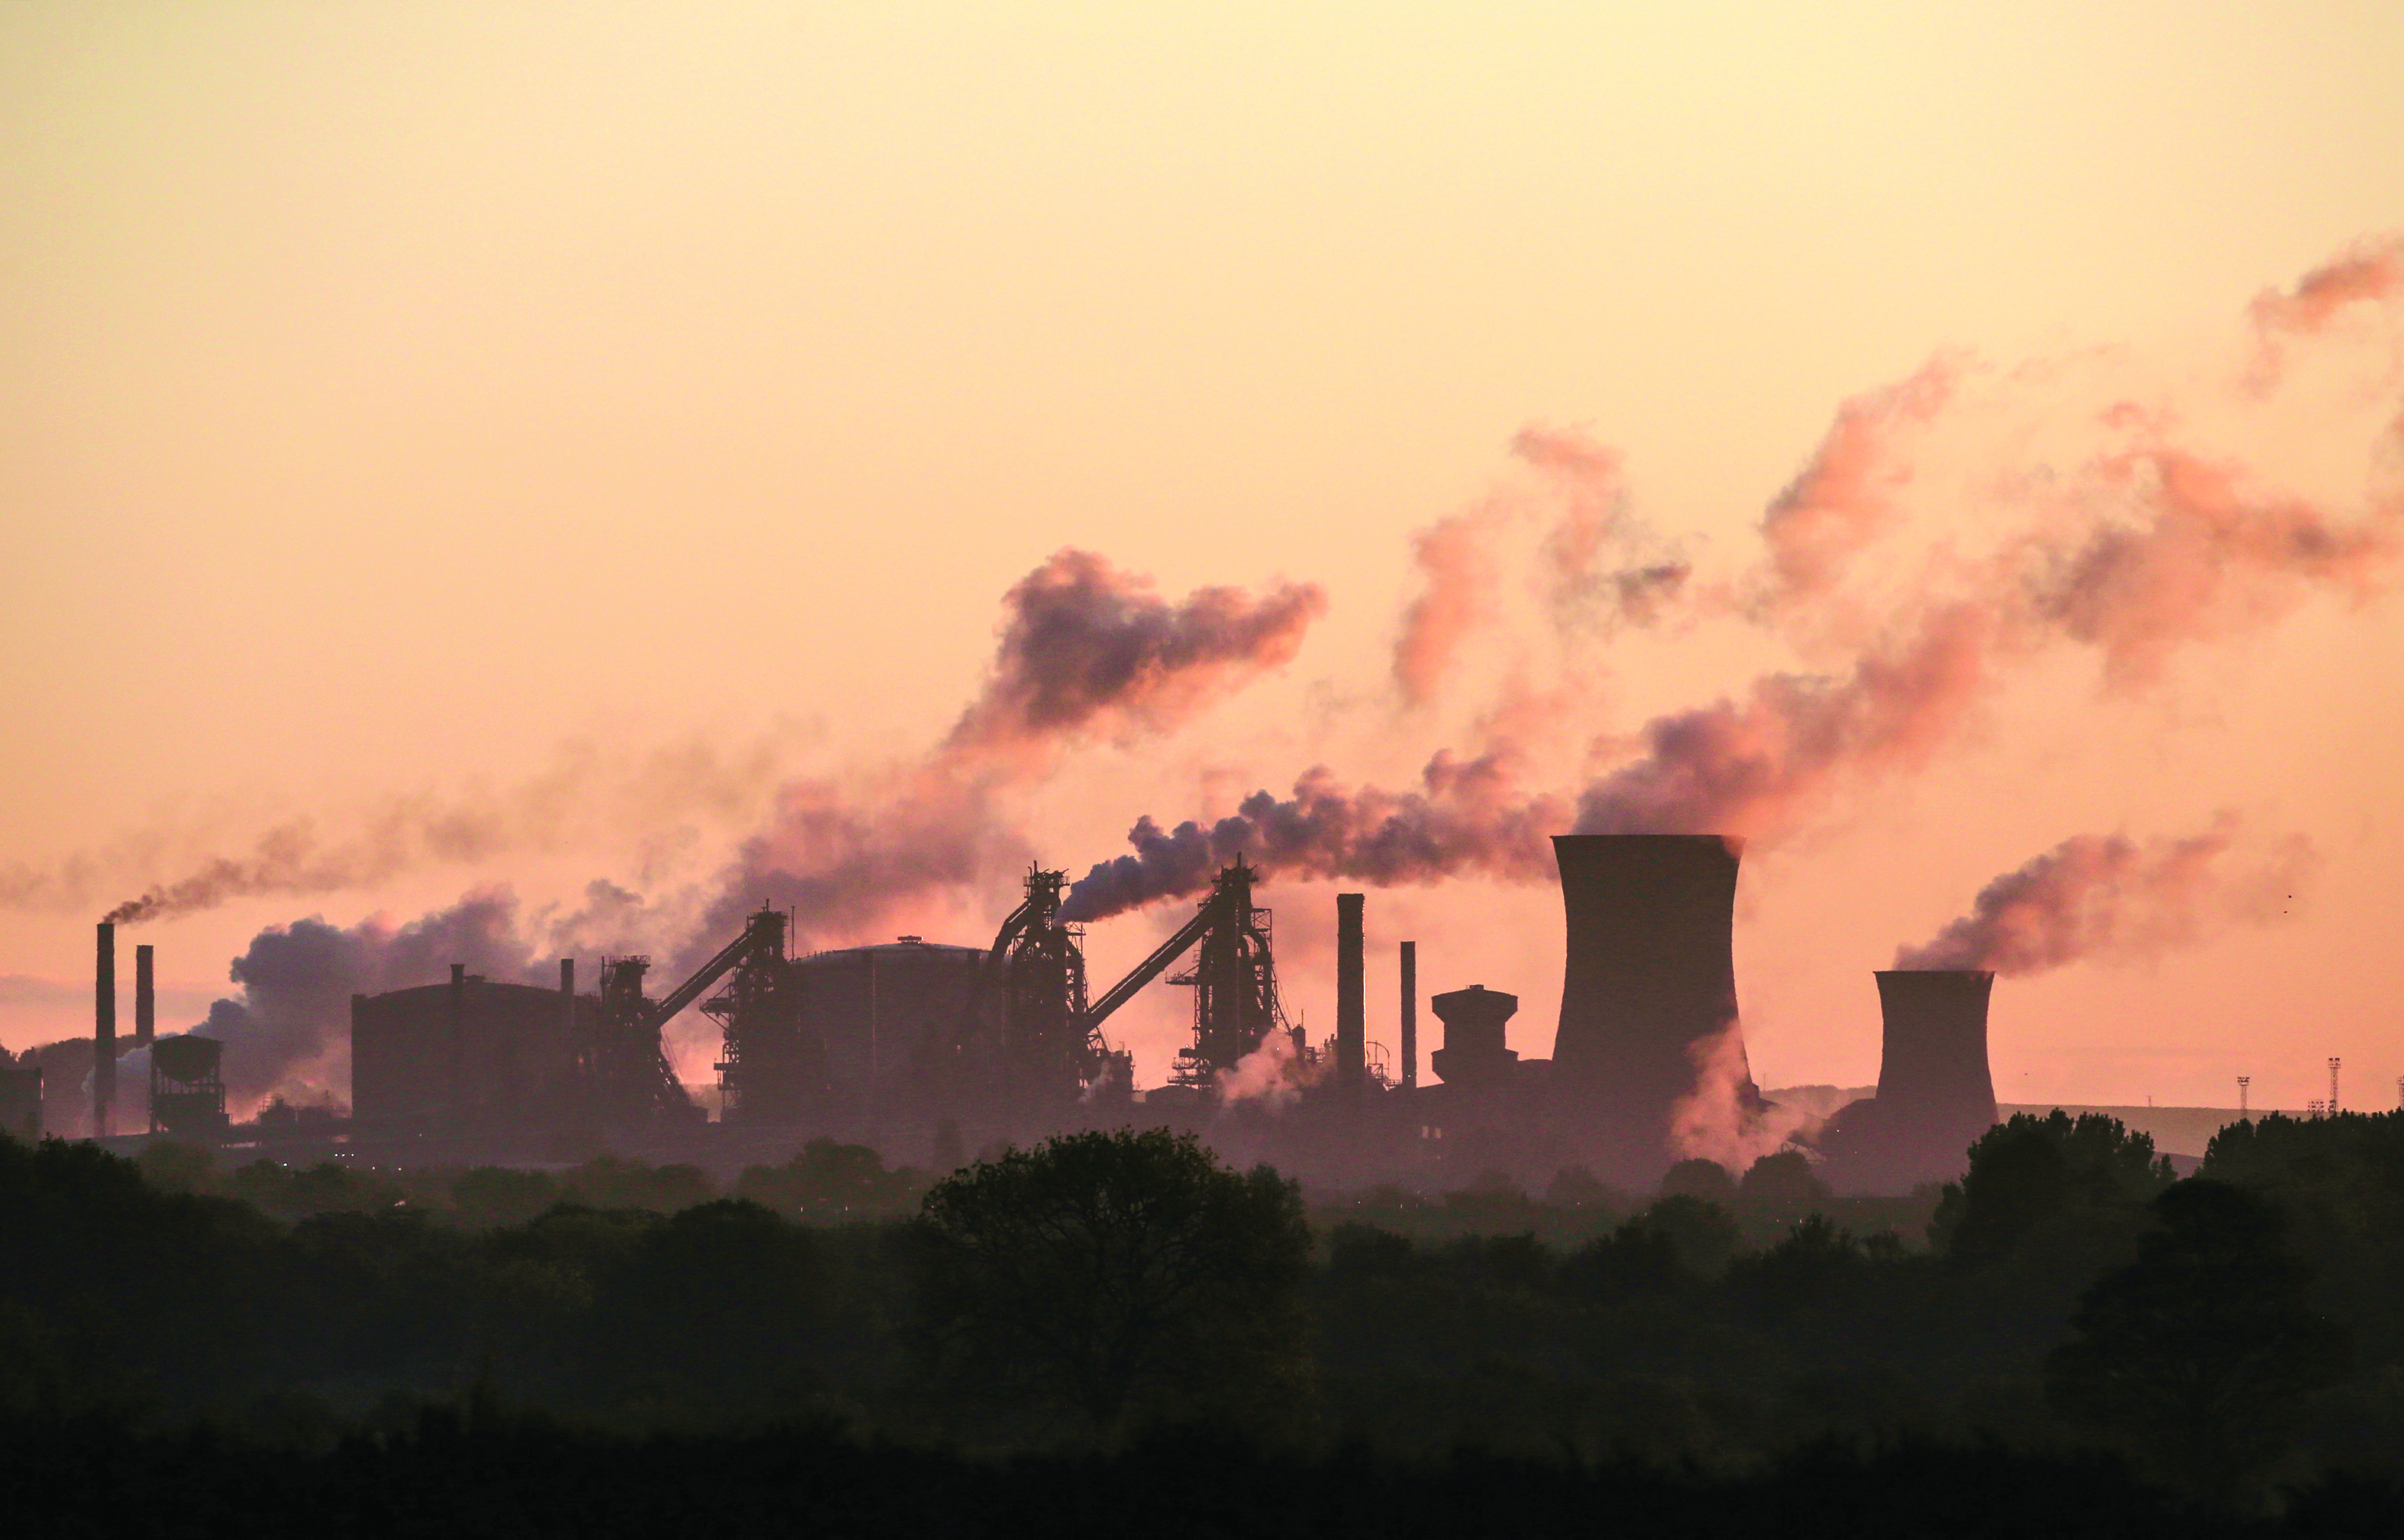 (FILES) In this file photo taken on May 22, 2019, vapour is pictured rising from British Steel's Scunthorpe plant at dawn in north Lincolnshire, north east England - UK manufacturing activity rebounded in February to a ten-month high on easing Brexit uncertainty, but supply chains were nevertheless pressured by coronavirus concerns, data showed on March 2, 2020. The IHS Markit UK Manufacturing purchasing managers' index (PMI) stood at 51.7 last month, the group said in a statement. (Photo by Lindsey Parnaby / AFP)